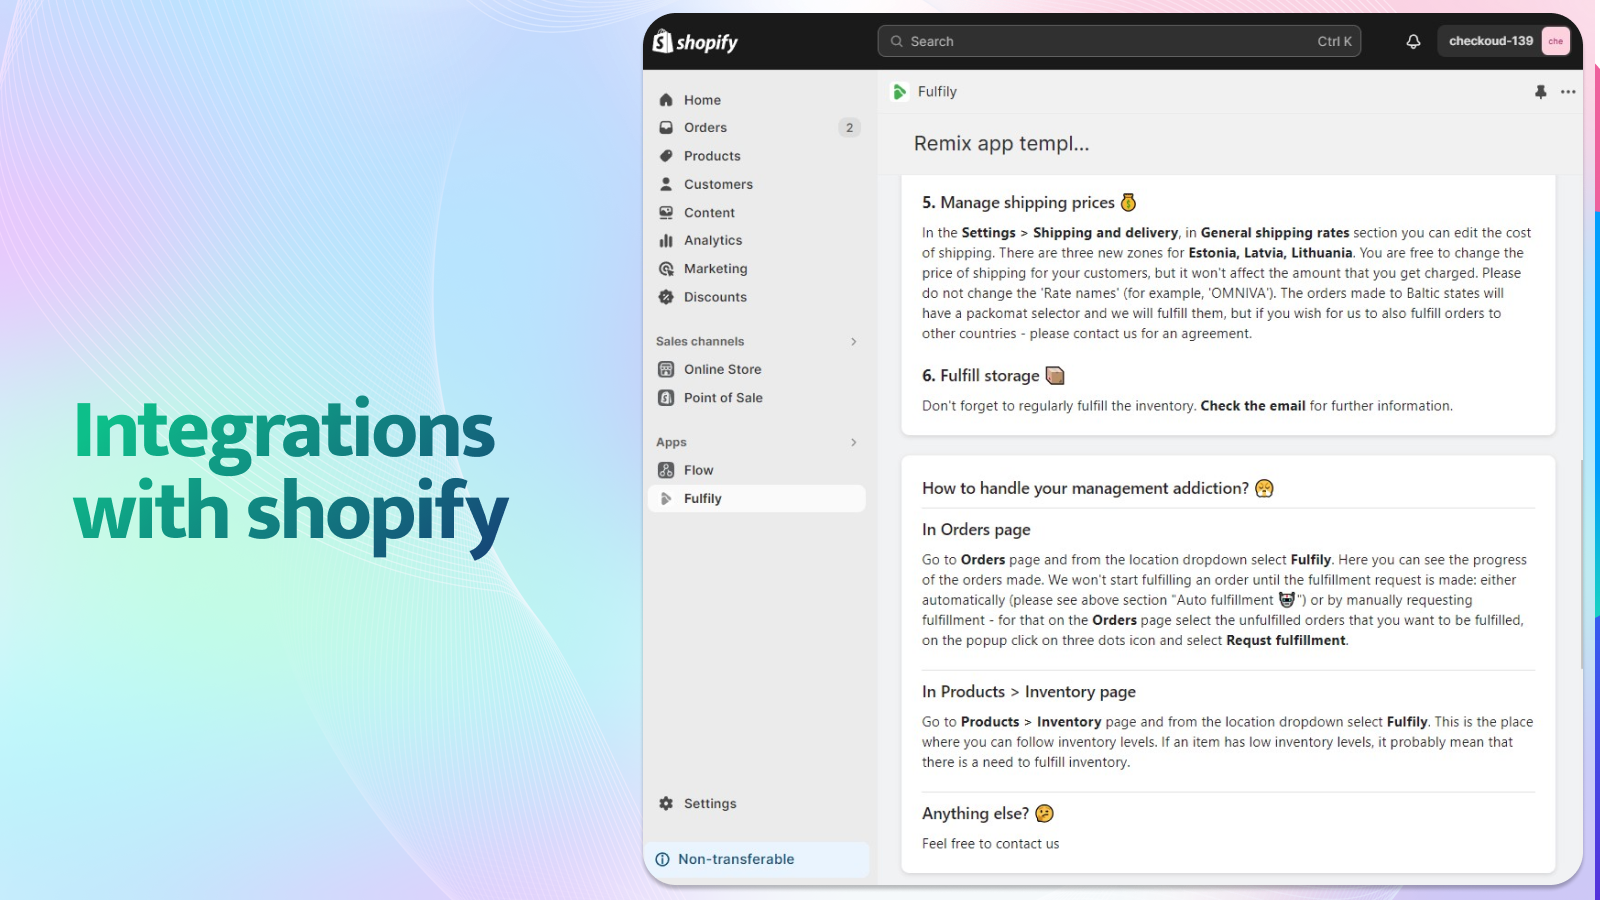 Integrations with shopify (picture of app admin dashboard 2)